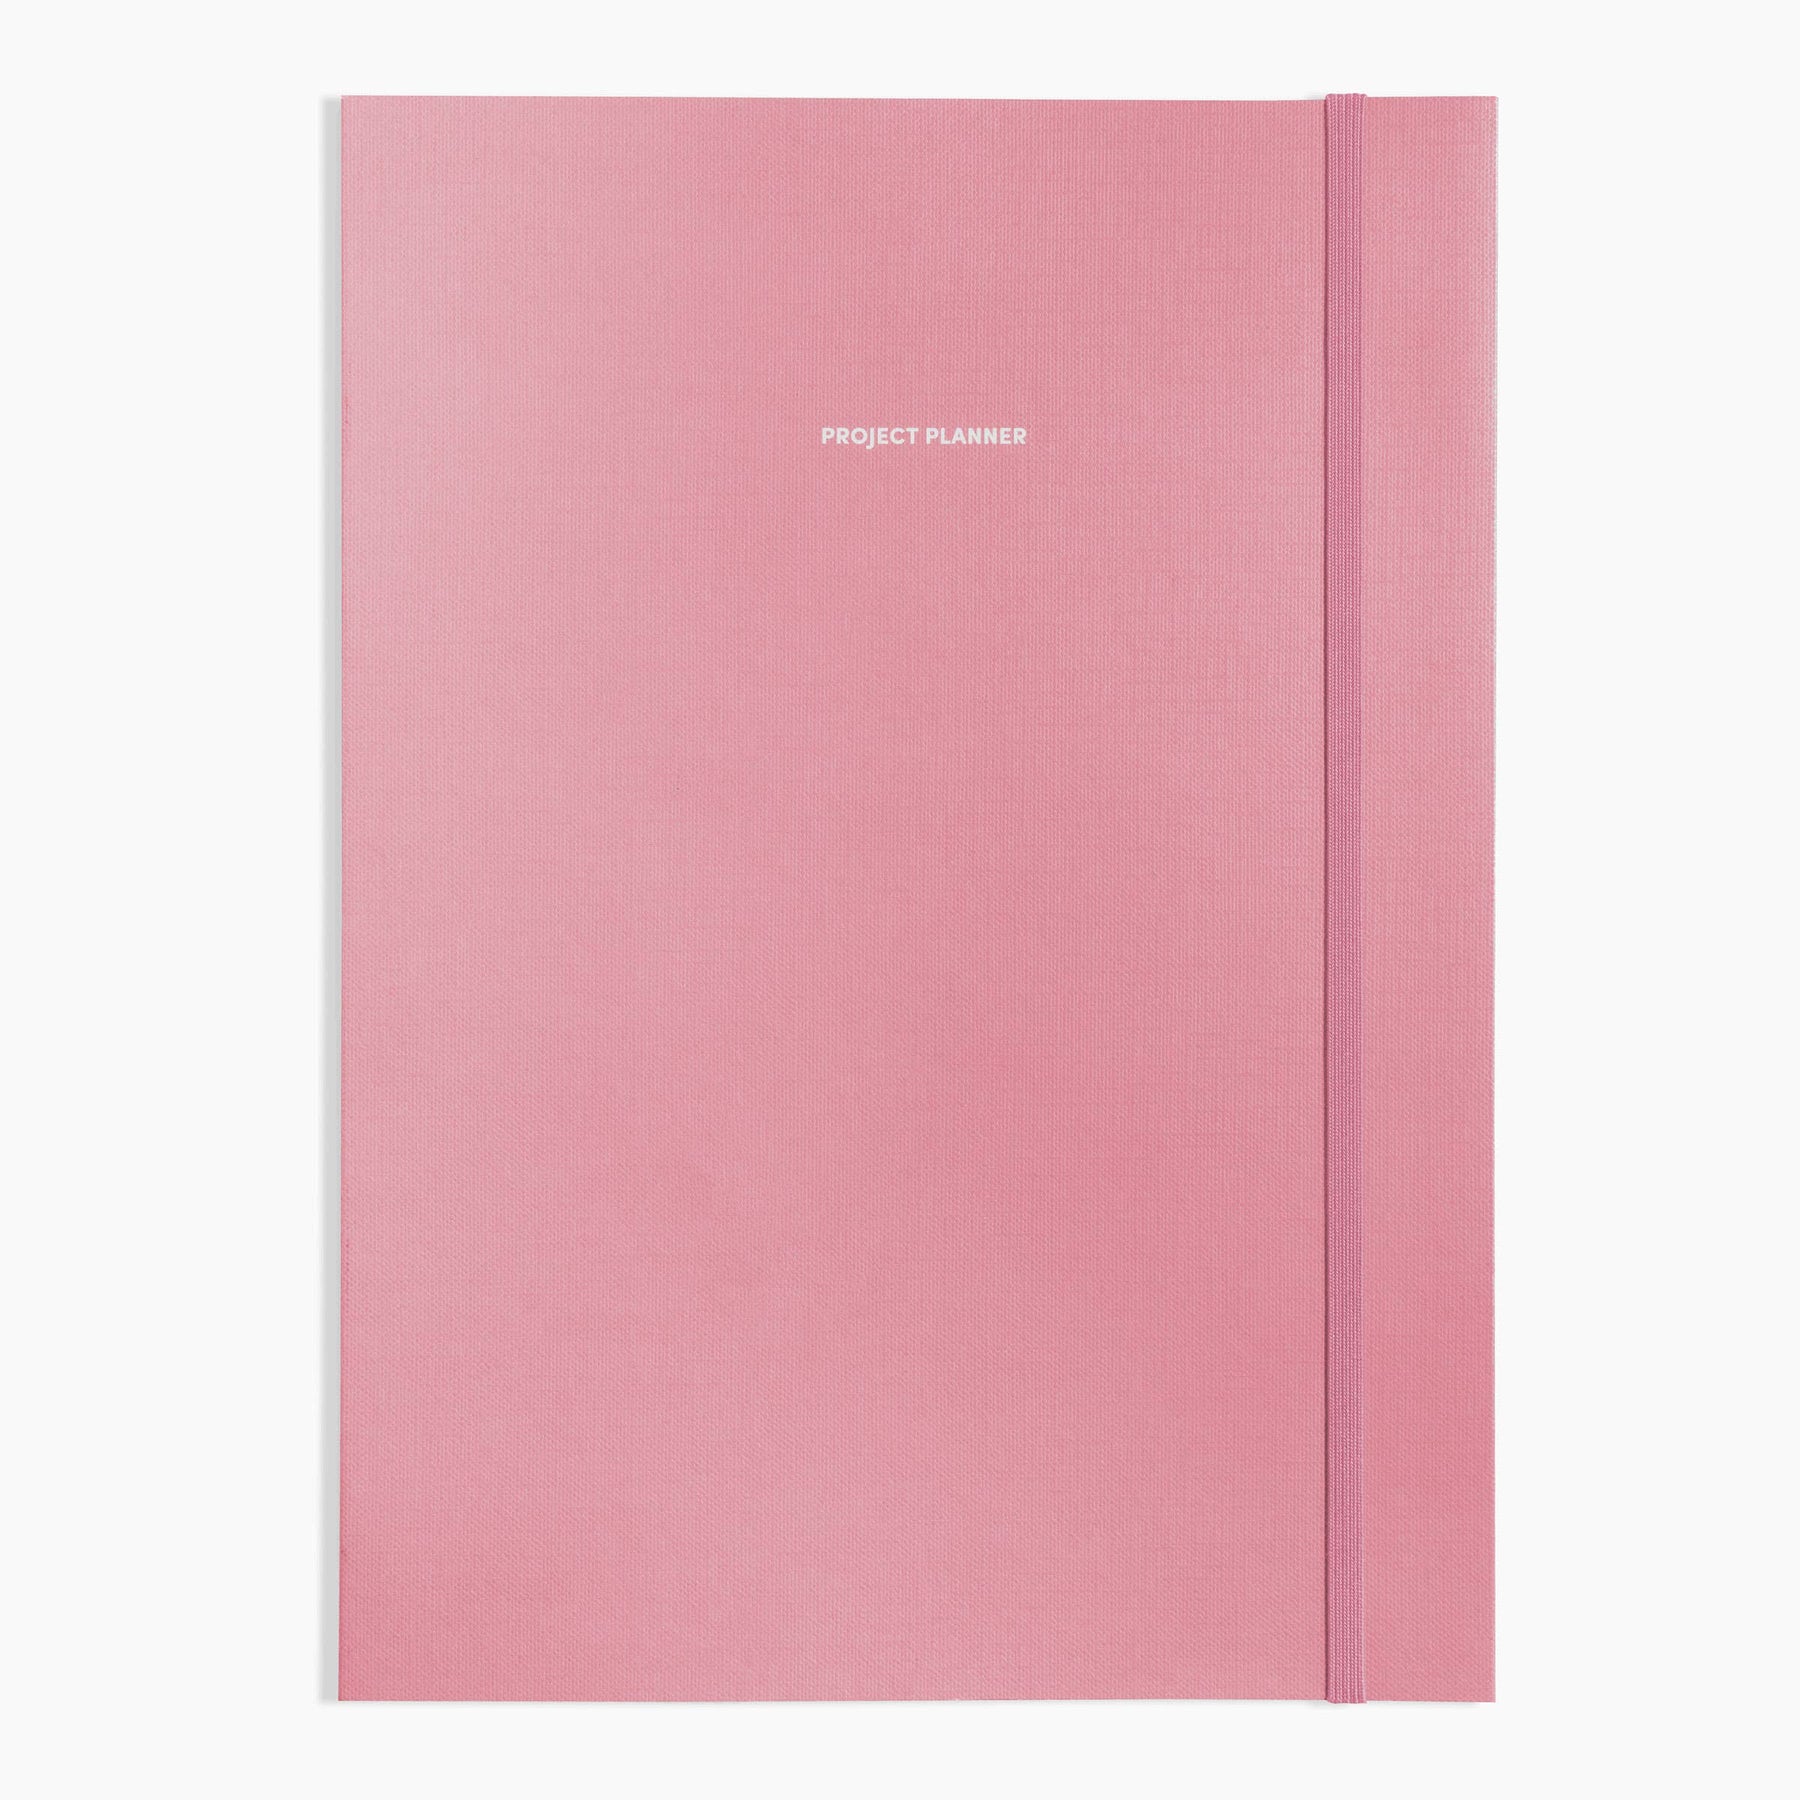 Project Planner in Rose